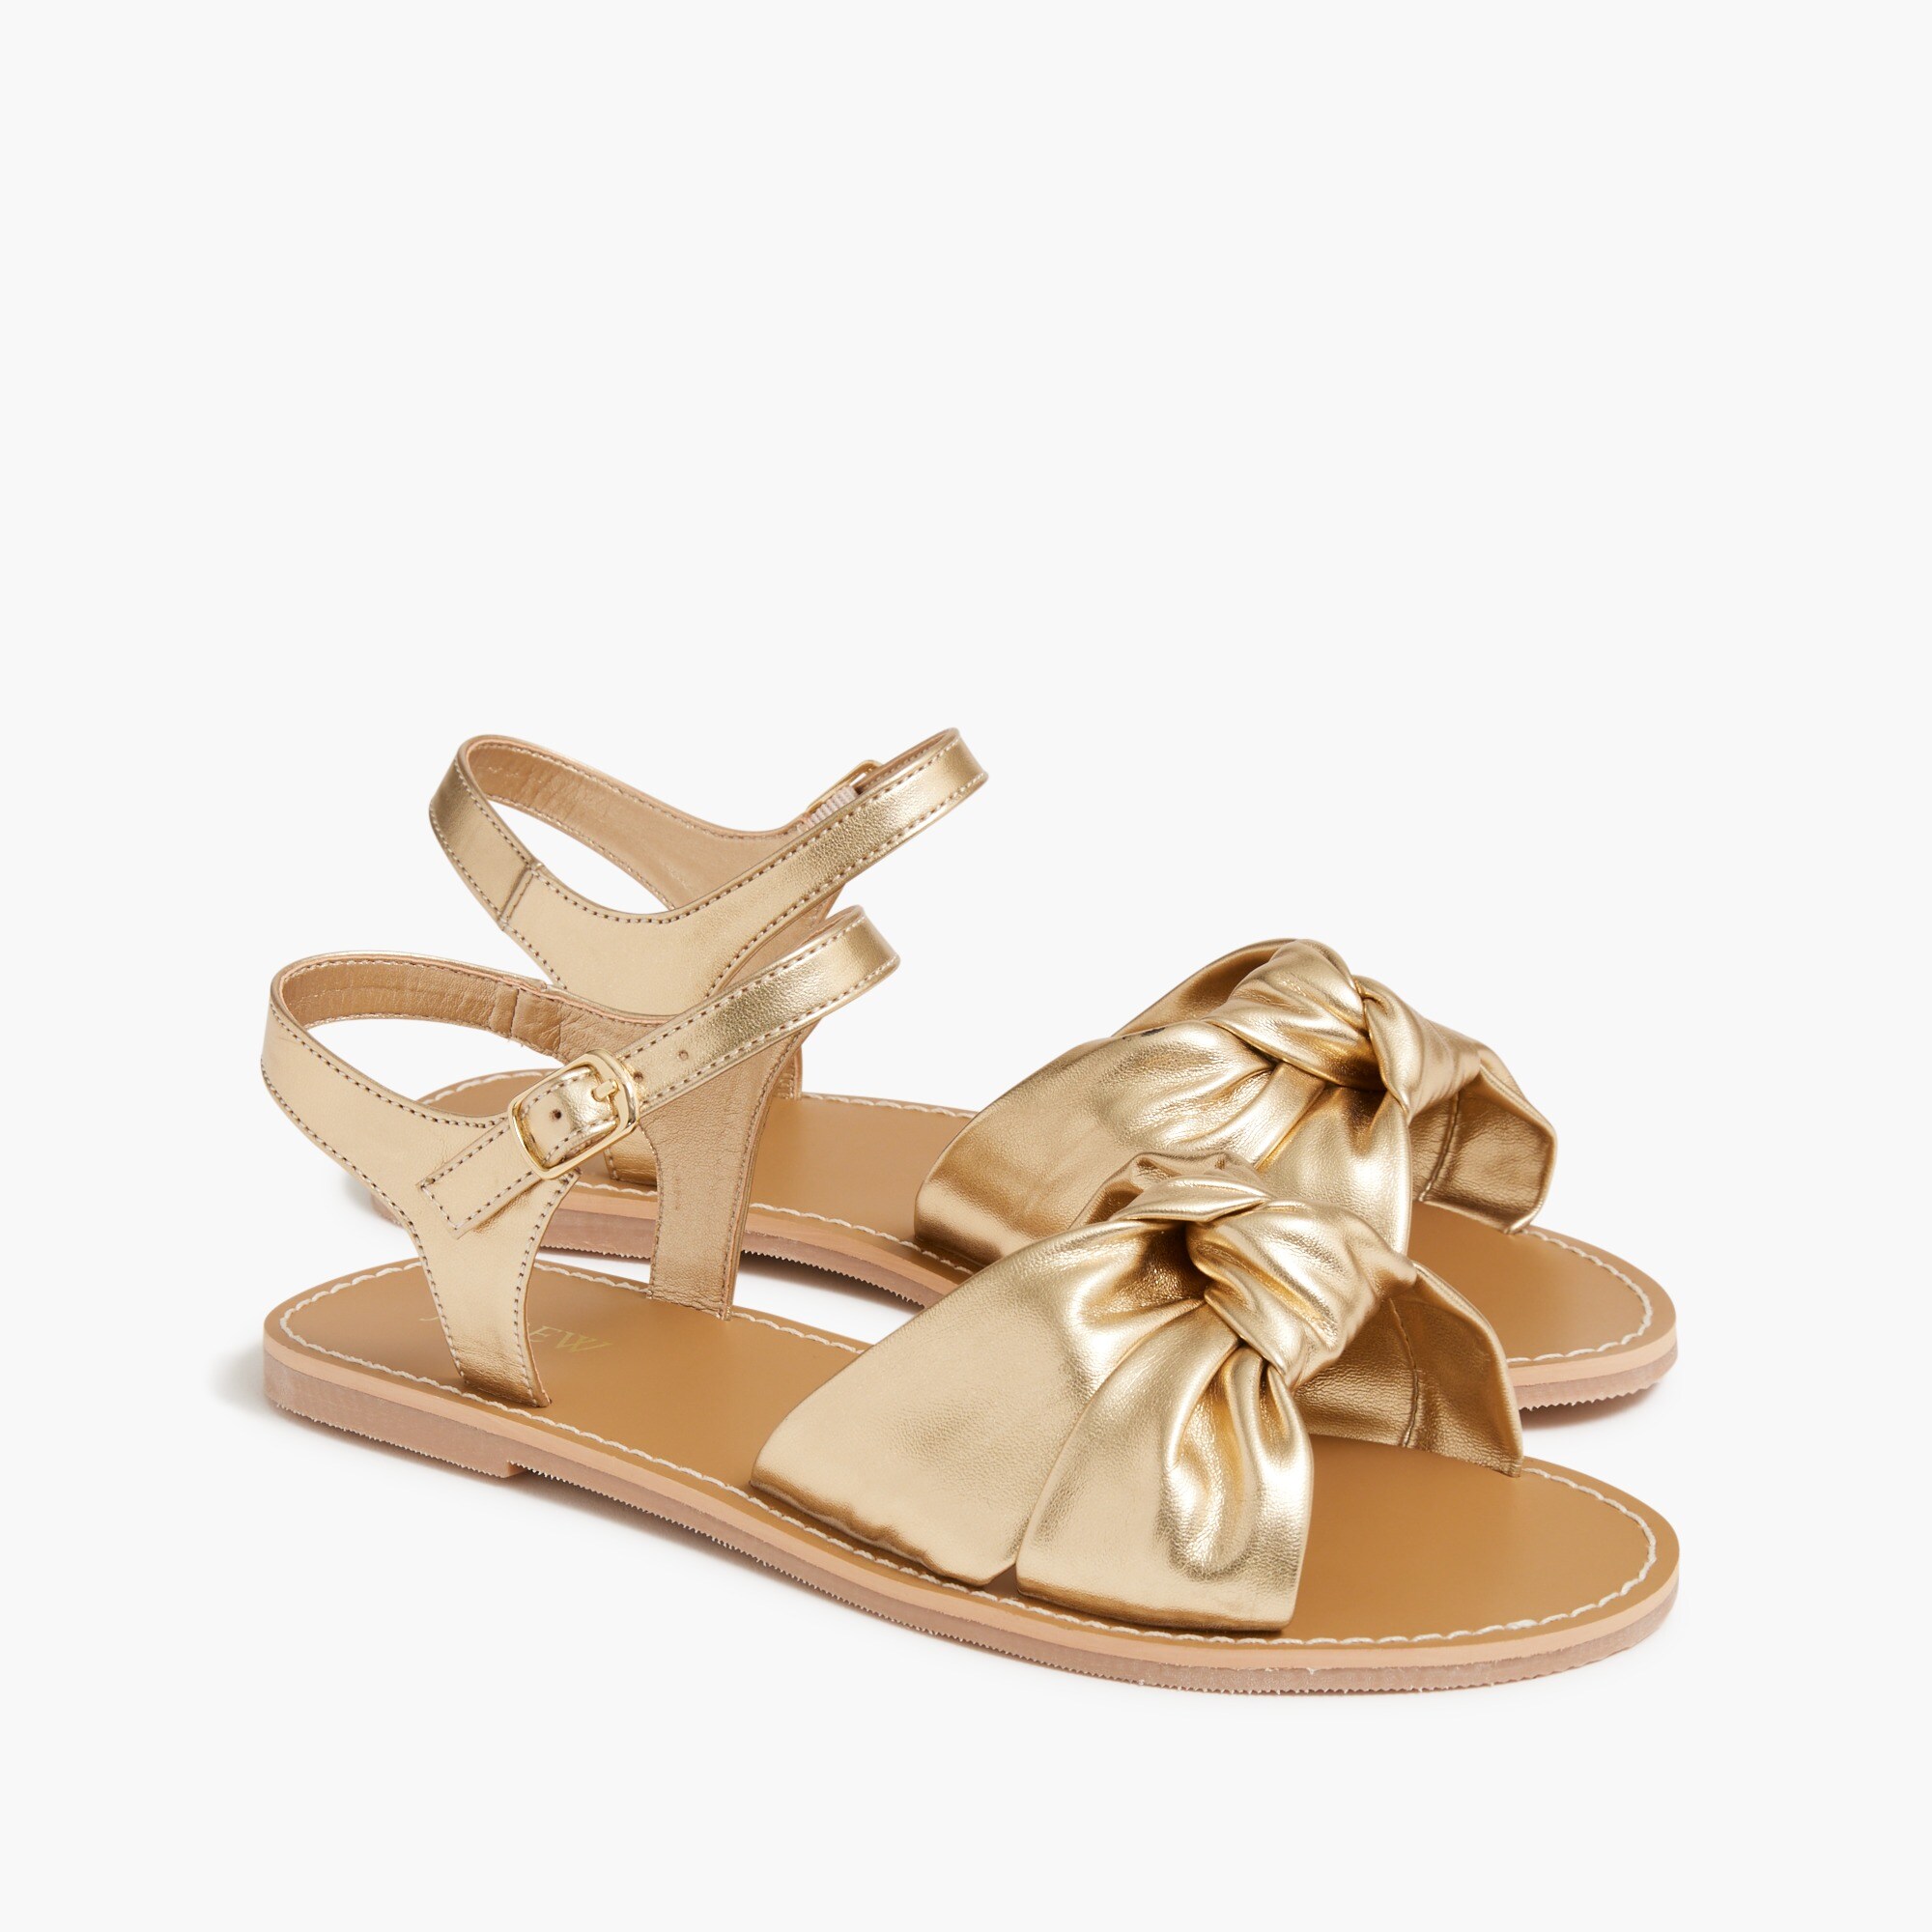  Girls' knot sandals with ankle strap